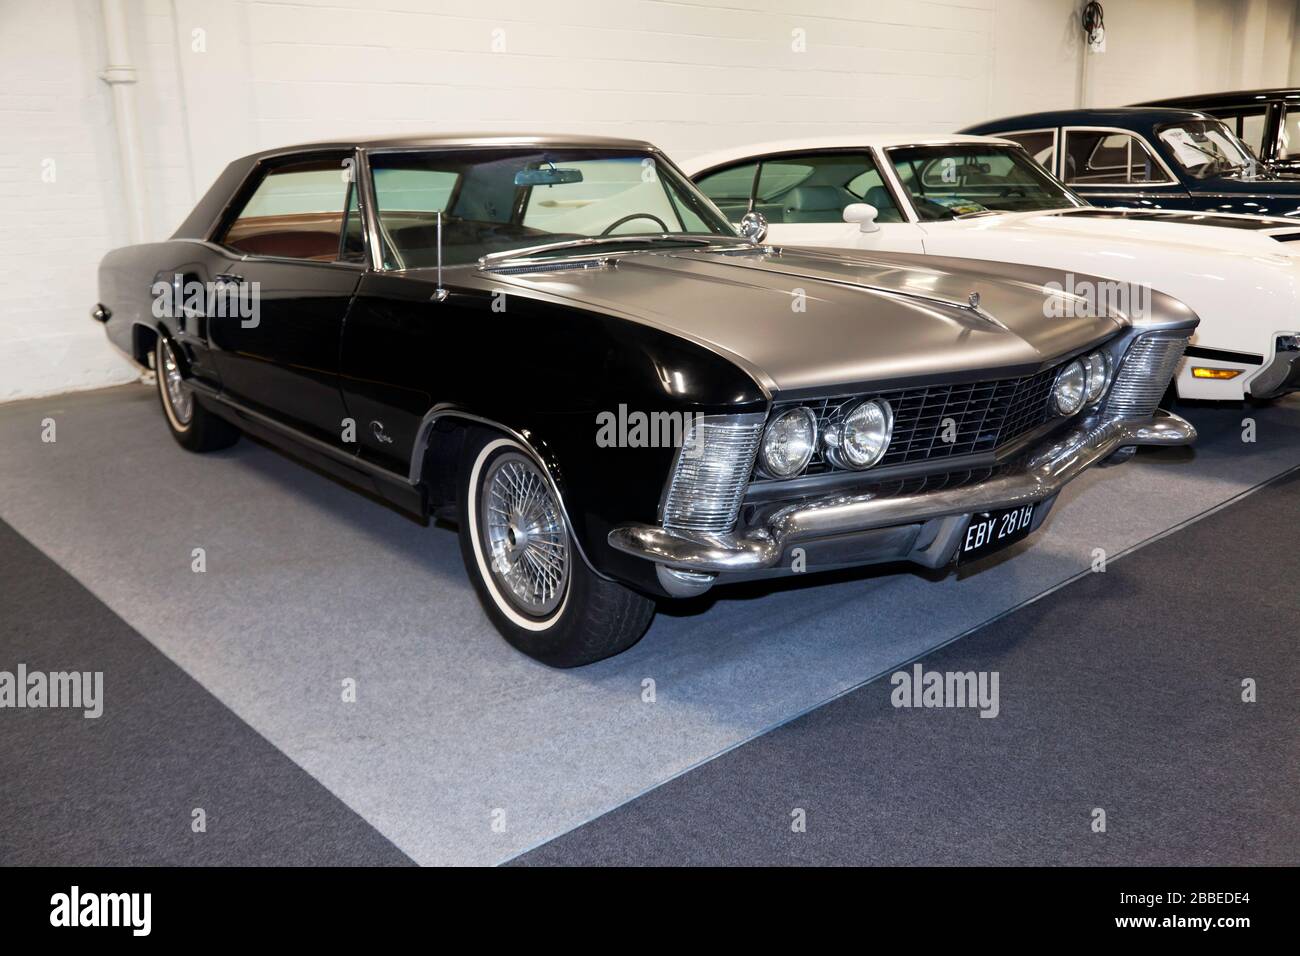 Three-quarters Front View of a 1964, First Generation, Buick Riviera, on display at the 2020 London Classic Car Show Stock Photo